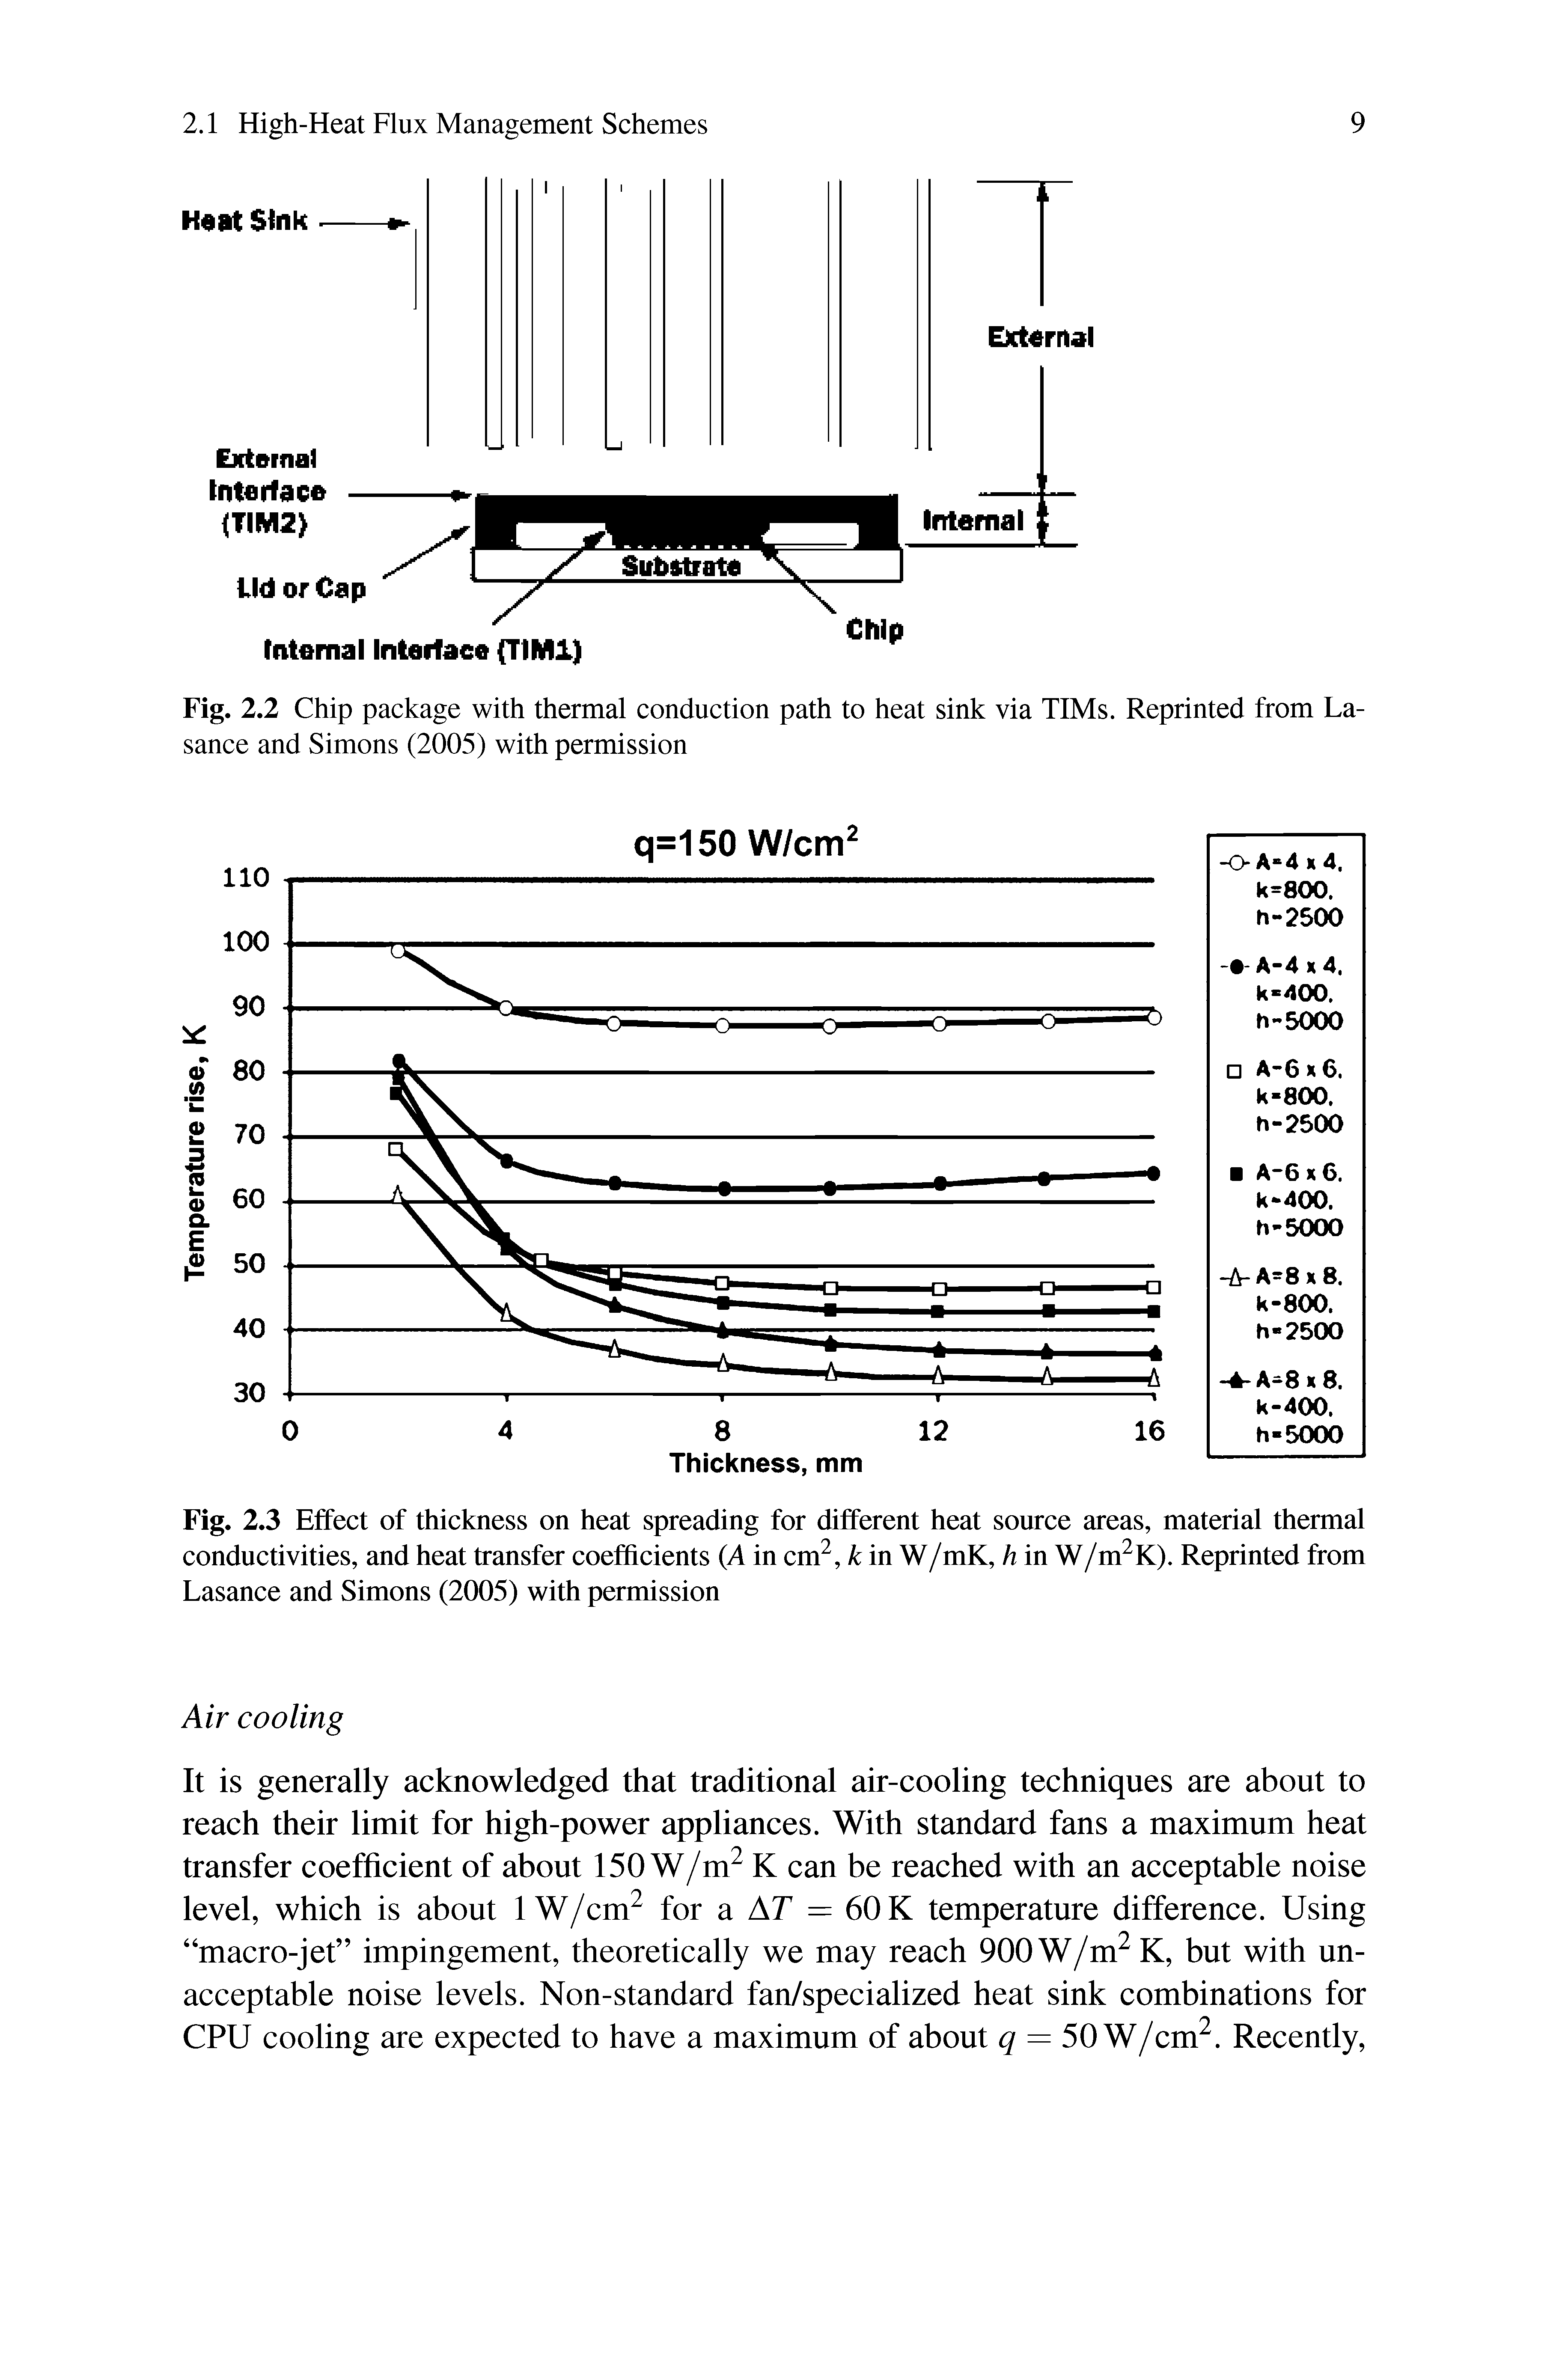 Fig. 2.2 Chip package with thermal conduction path to heat sink via TIMs. Reprinted from La-sance and Simons (2005) with permission...